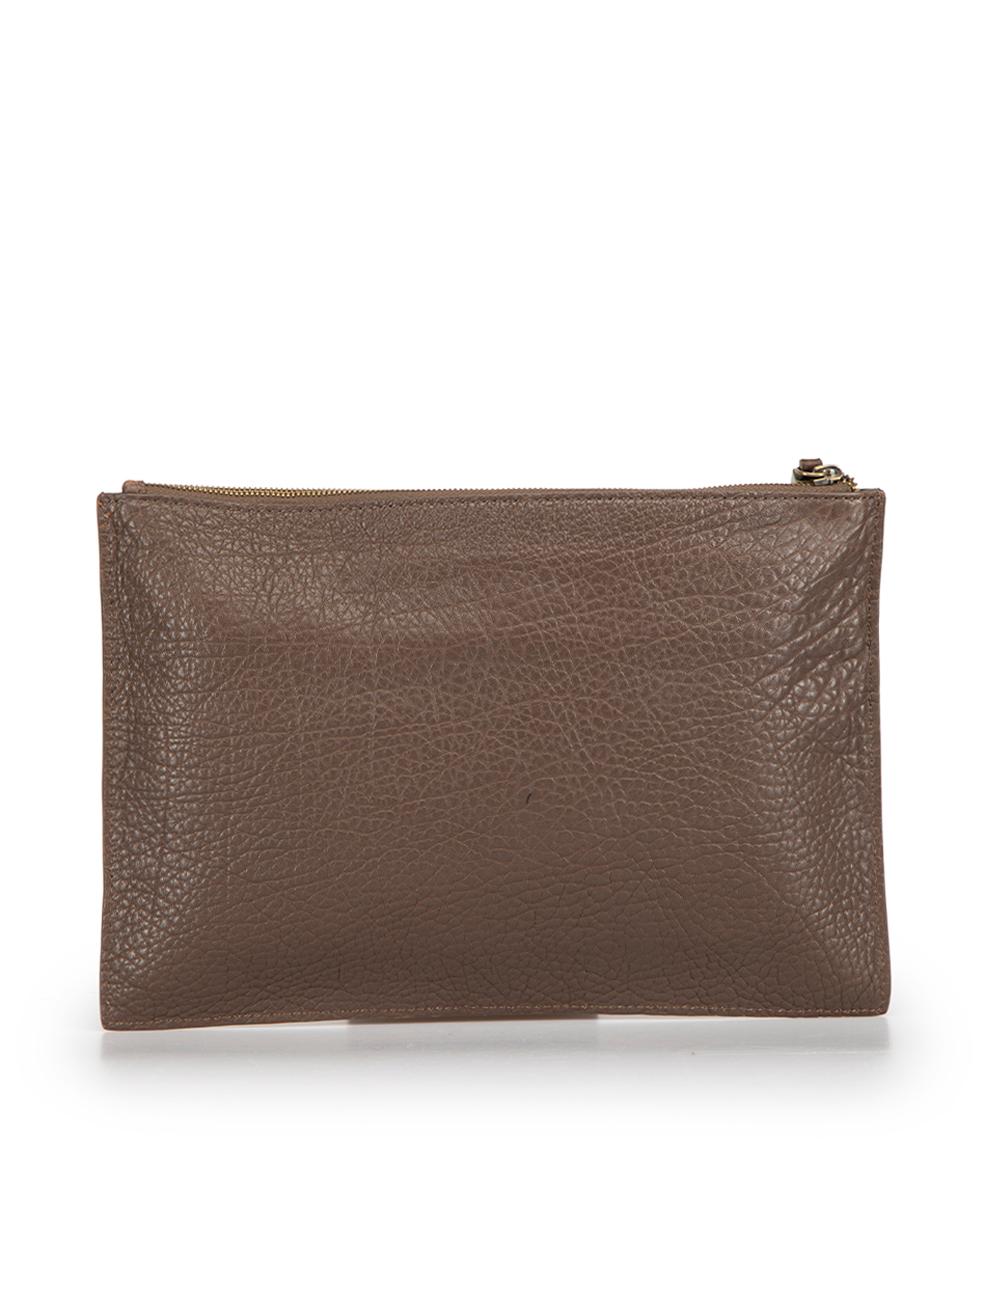 Alexander McQueen Women's Brown Leather Razor Clutch In Good Condition For Sale In London, GB